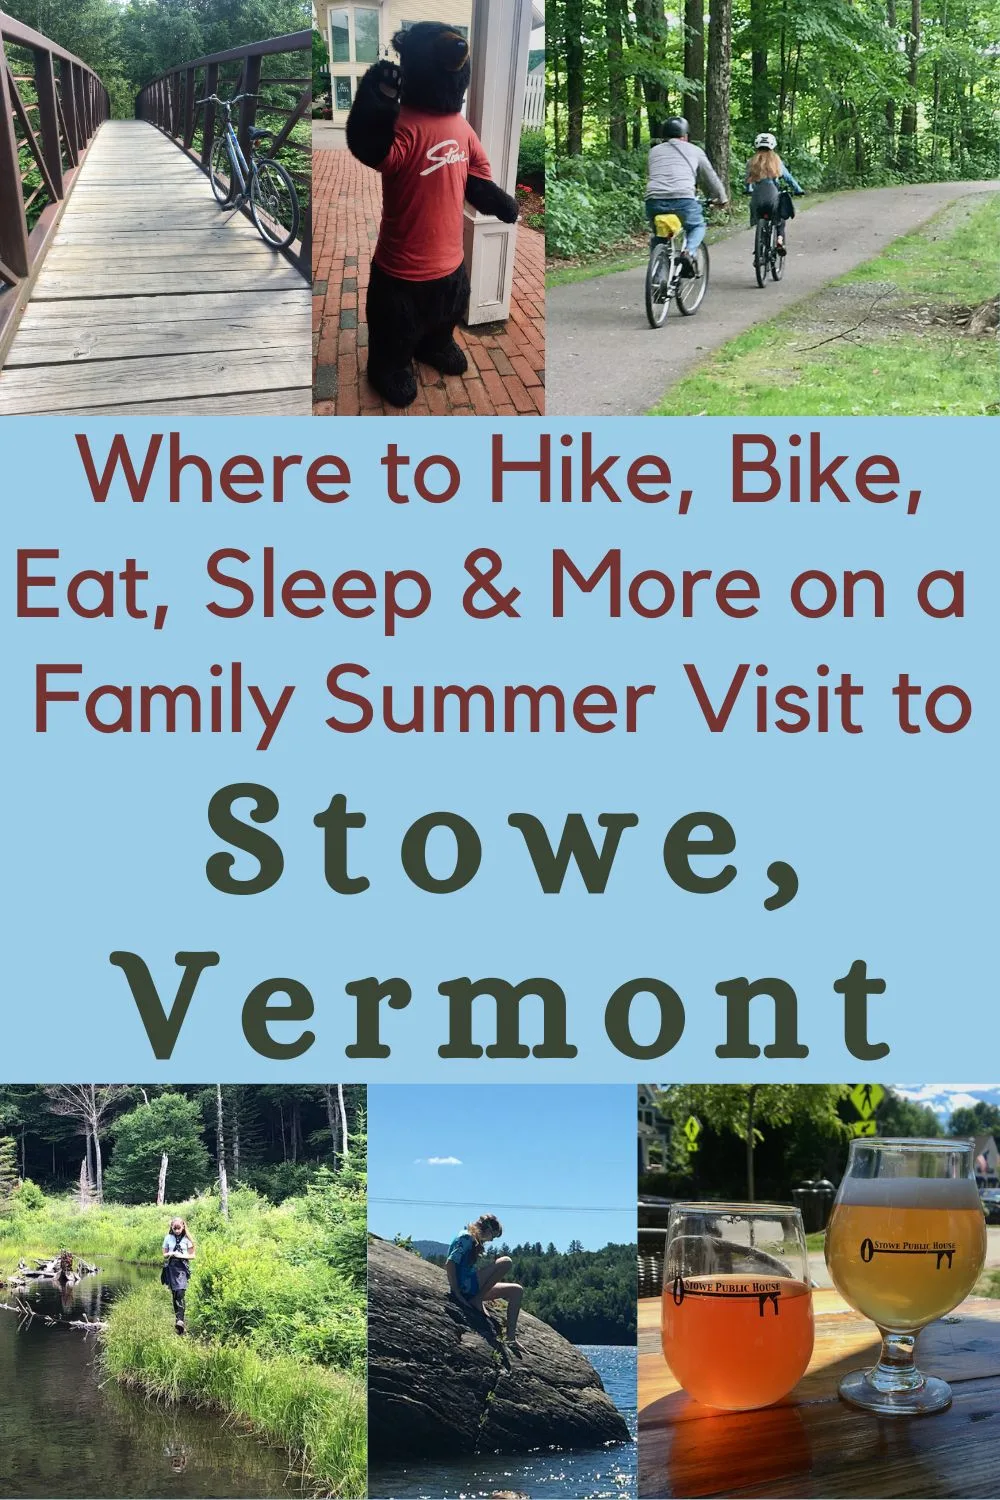 stowe vermont is an easy summer destination for families. there is plenty of free and cheap things to do outdoors, great local food, beer and cider and your pick of places to stay. 